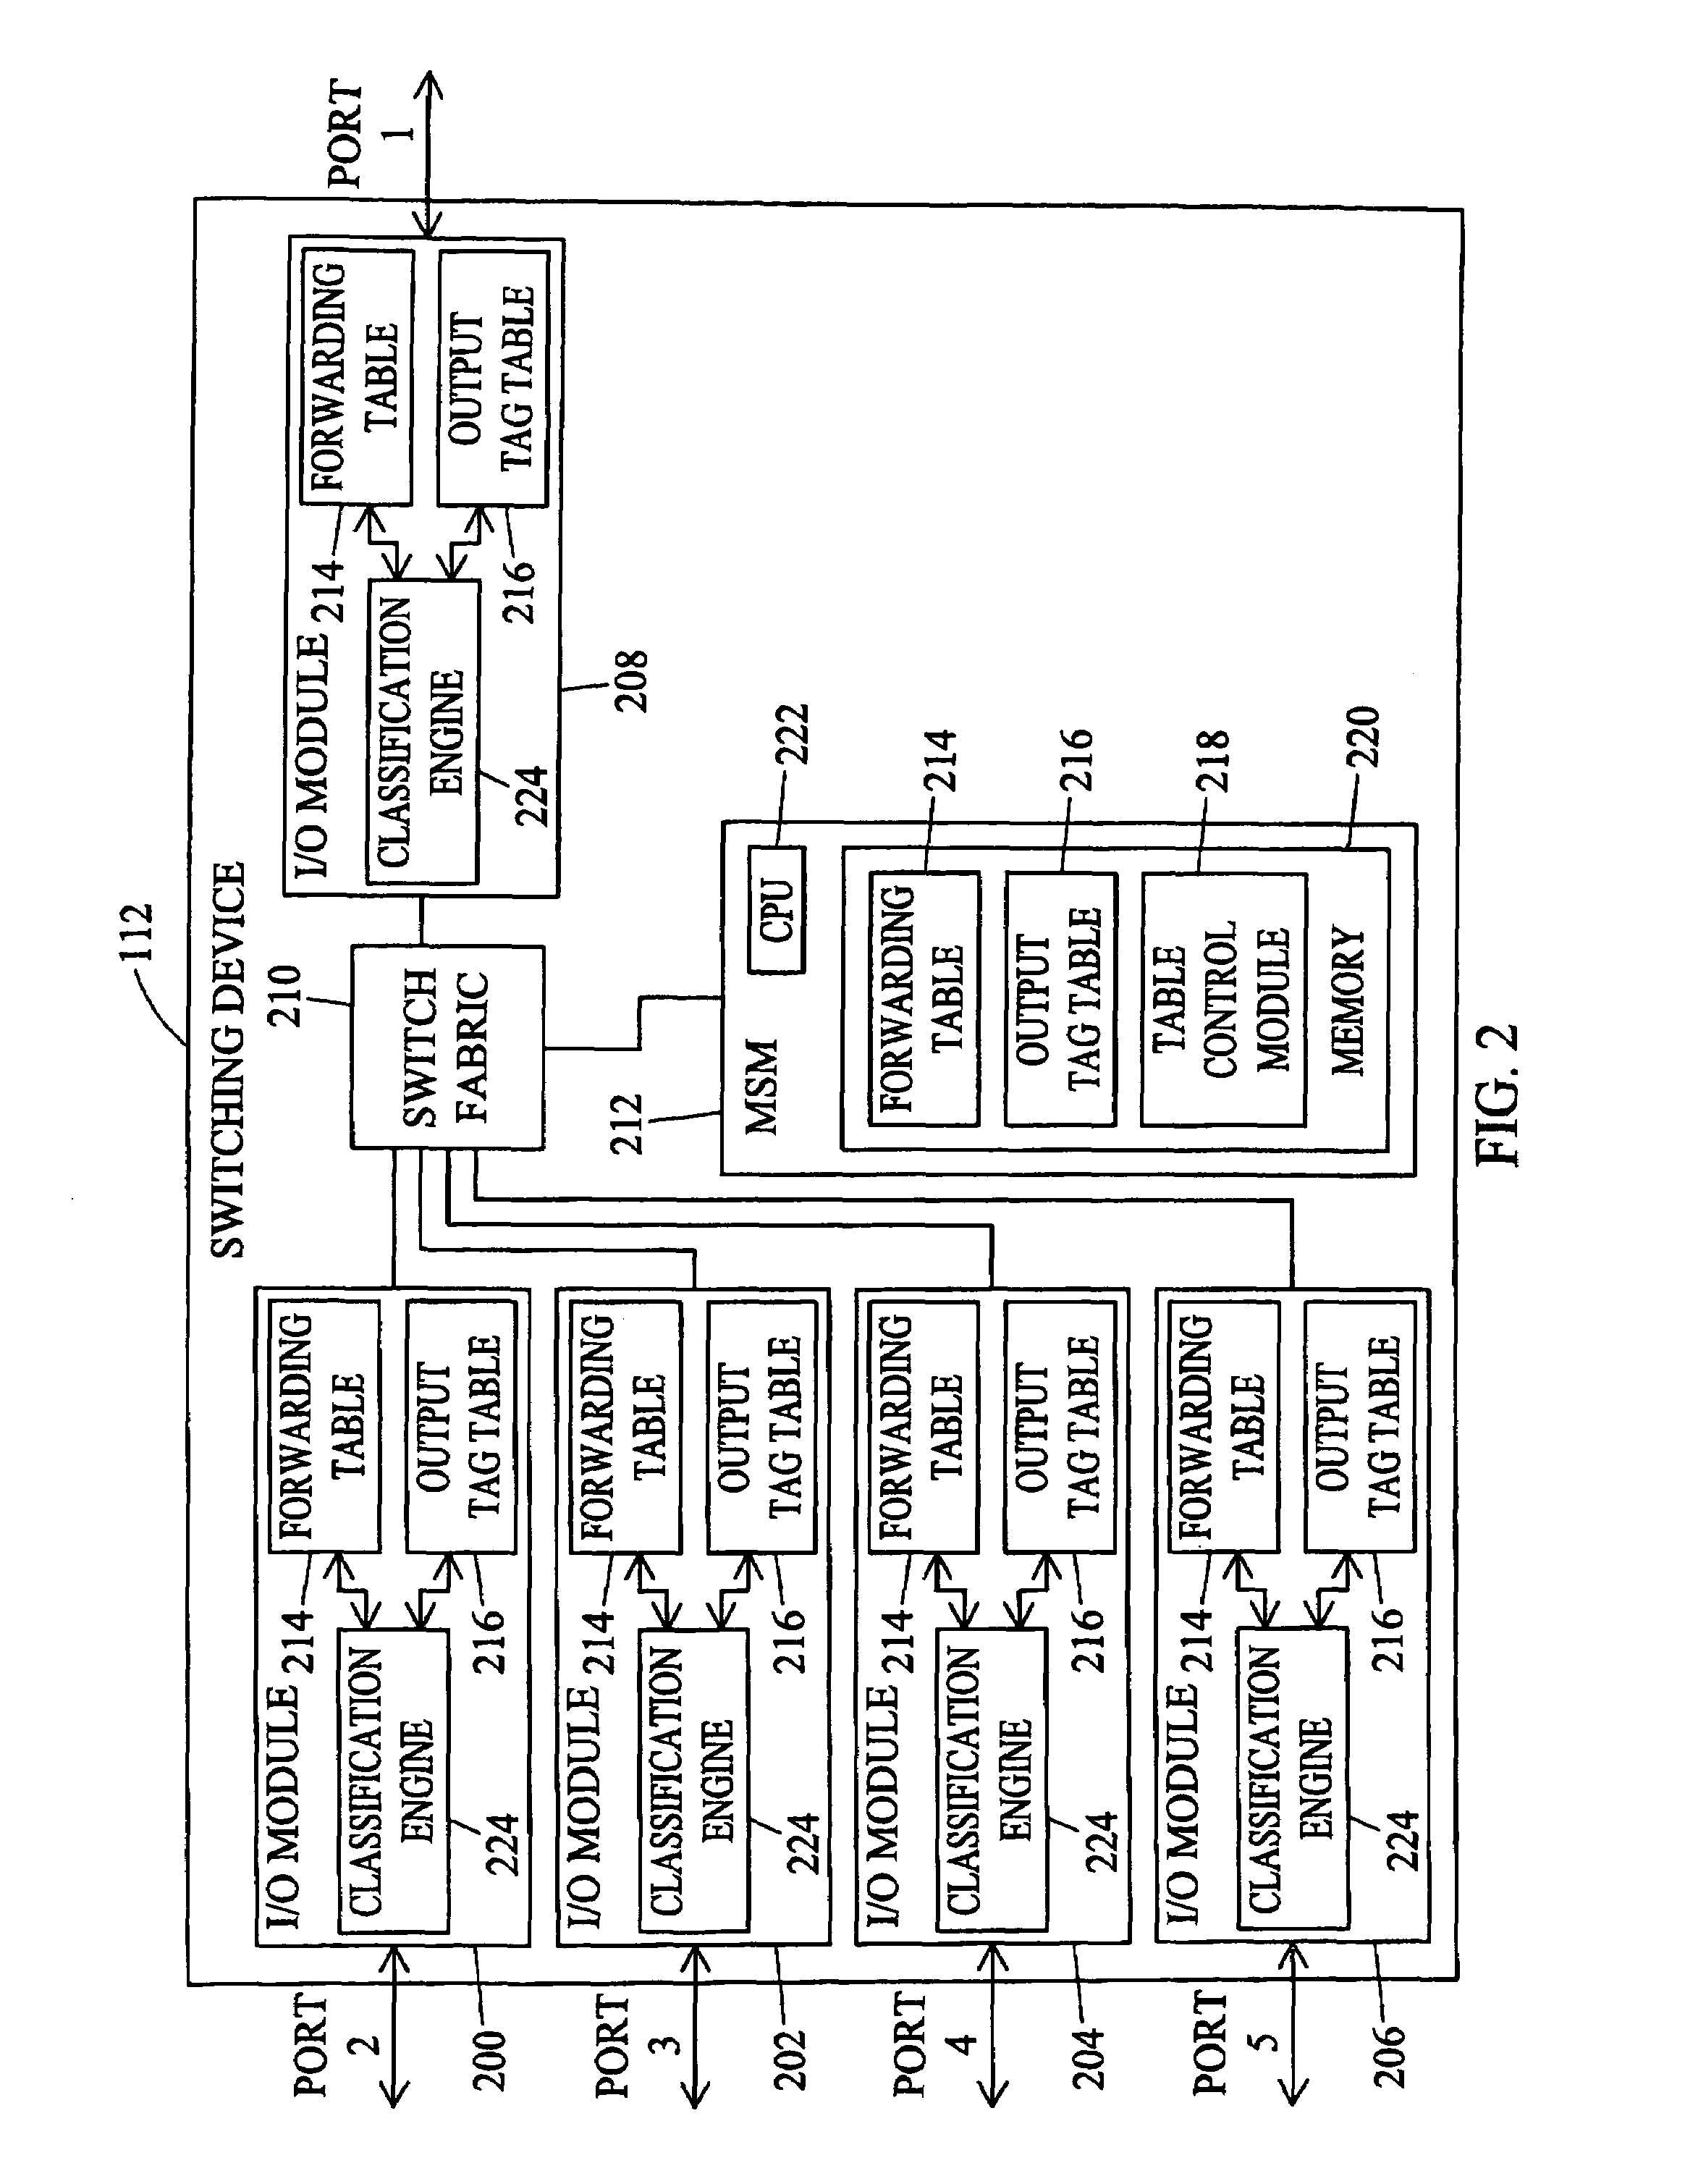 Methods and systems for associating and translating virtual local area network (VLAN) tags